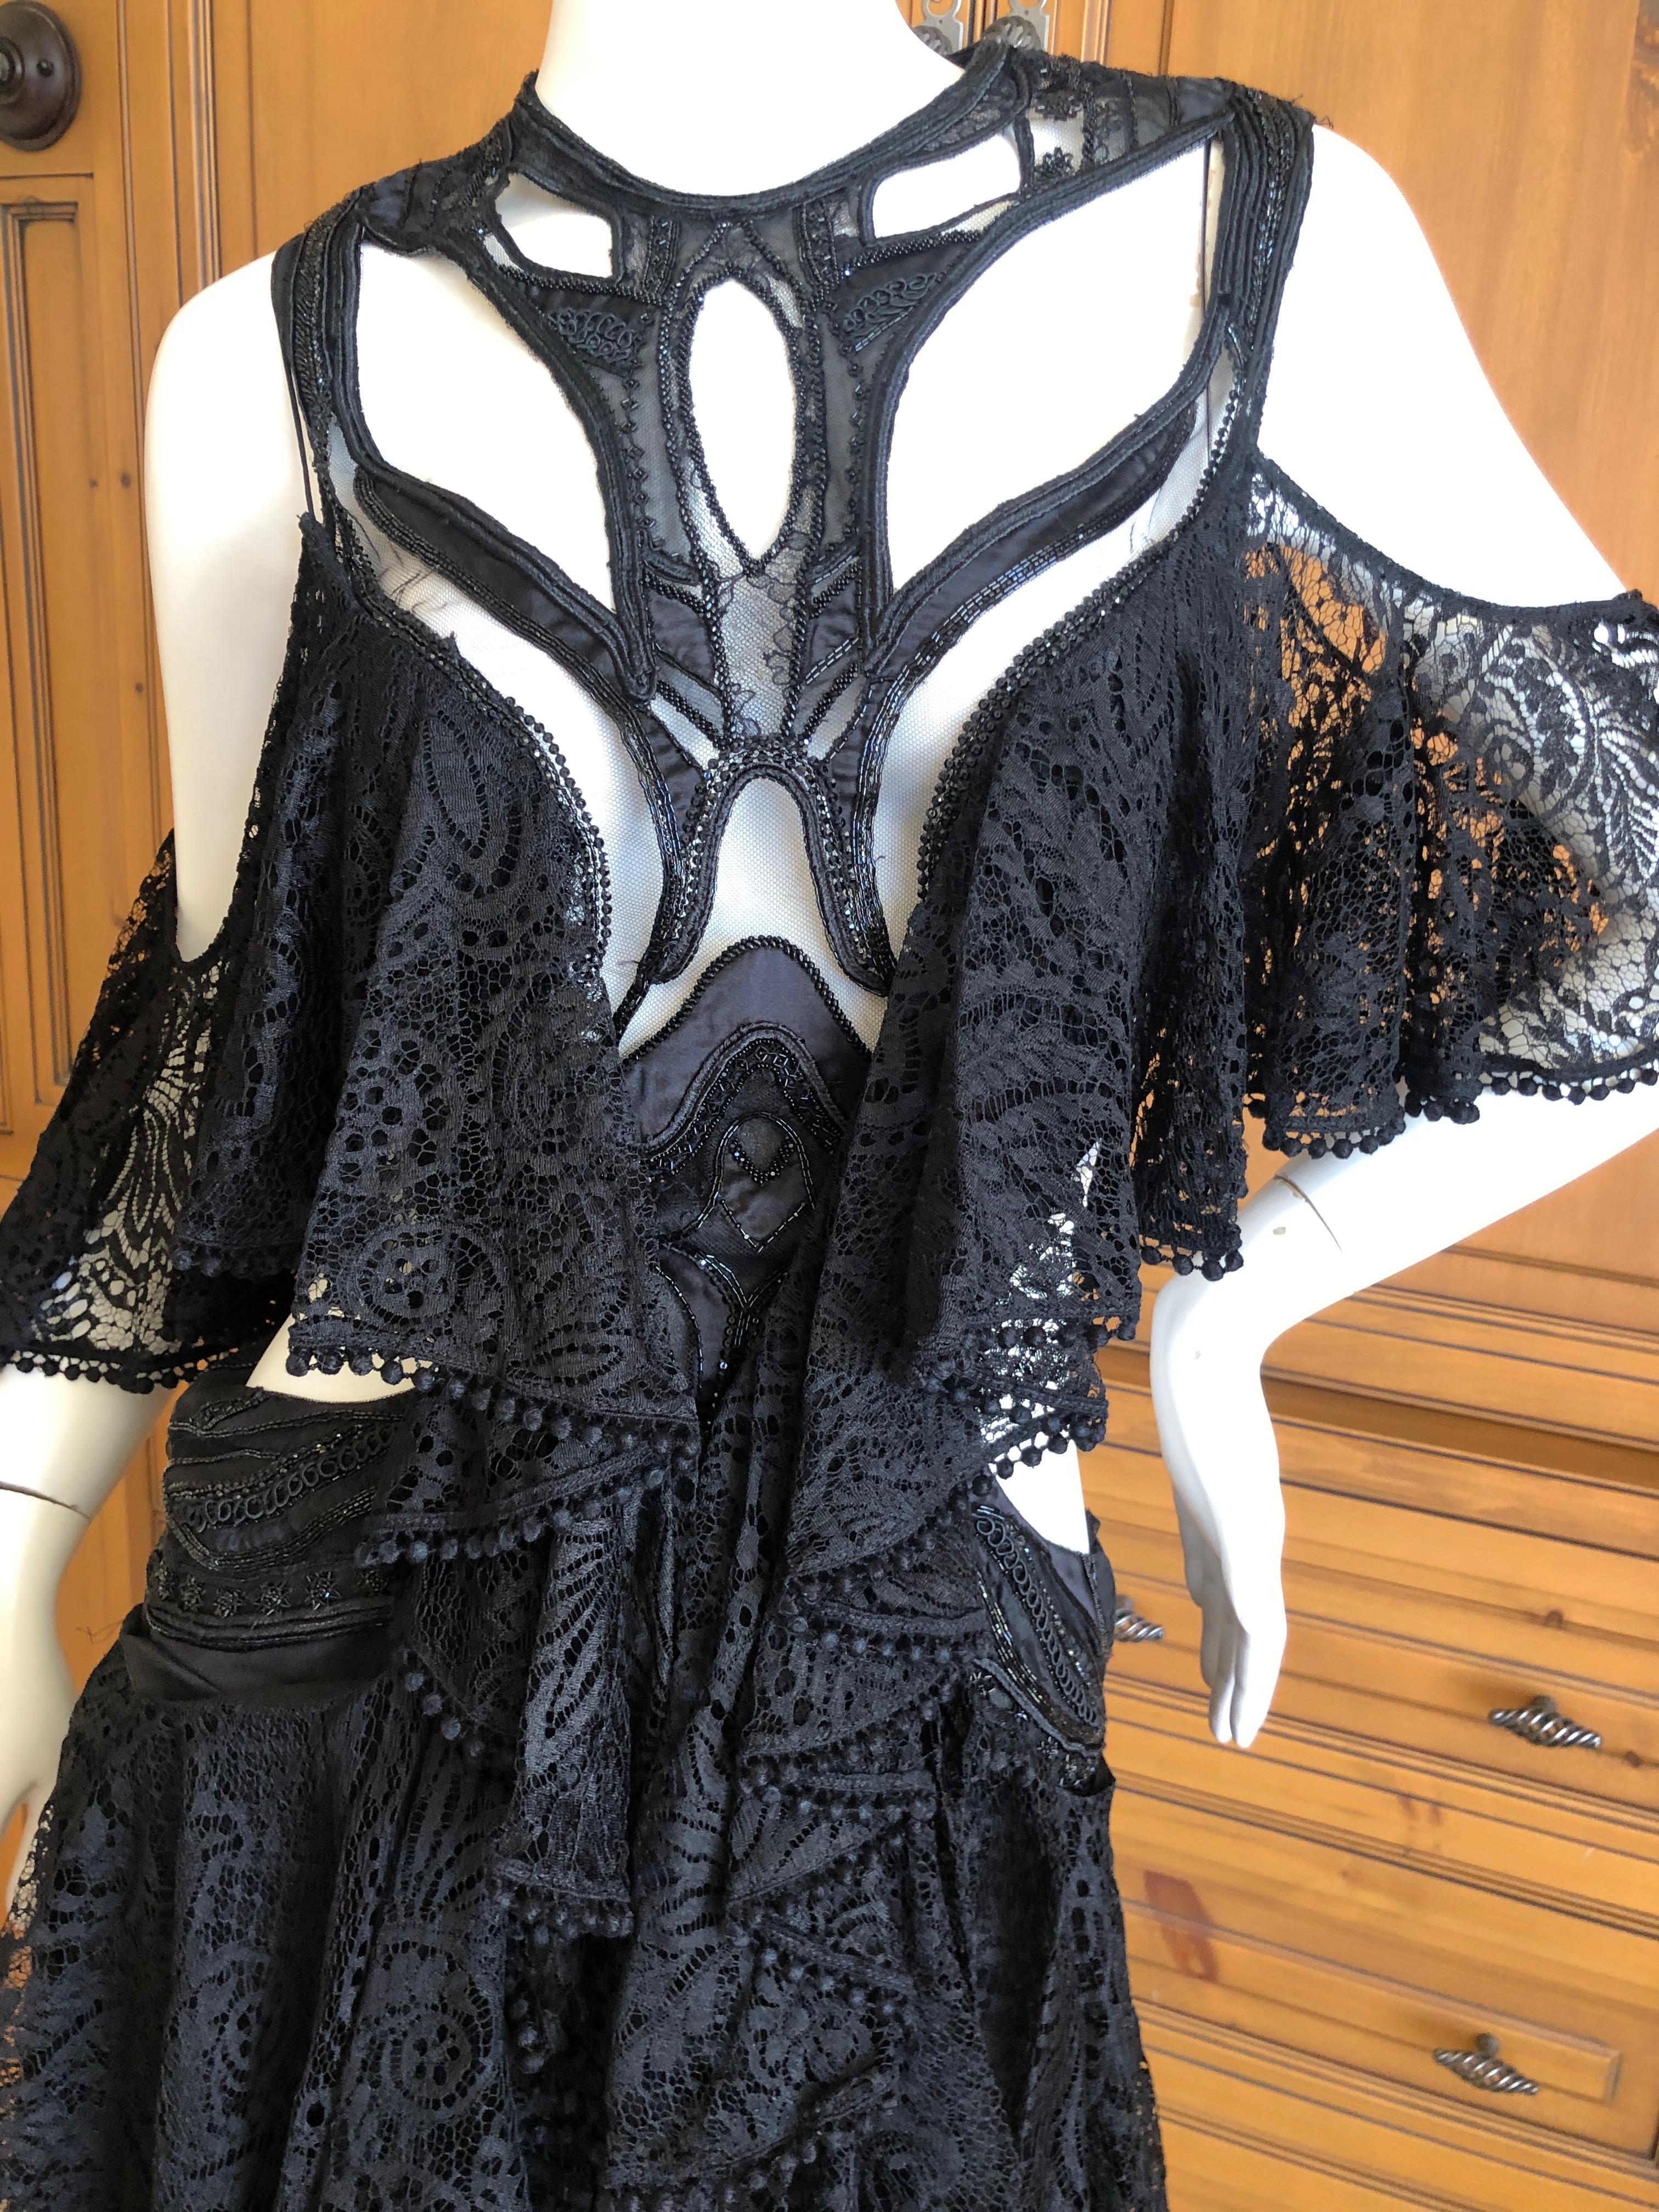 Alexander McQueen Pre Fall 2018 Goth Black Lace Beaded Dress by Sarah Burton For Sale 3